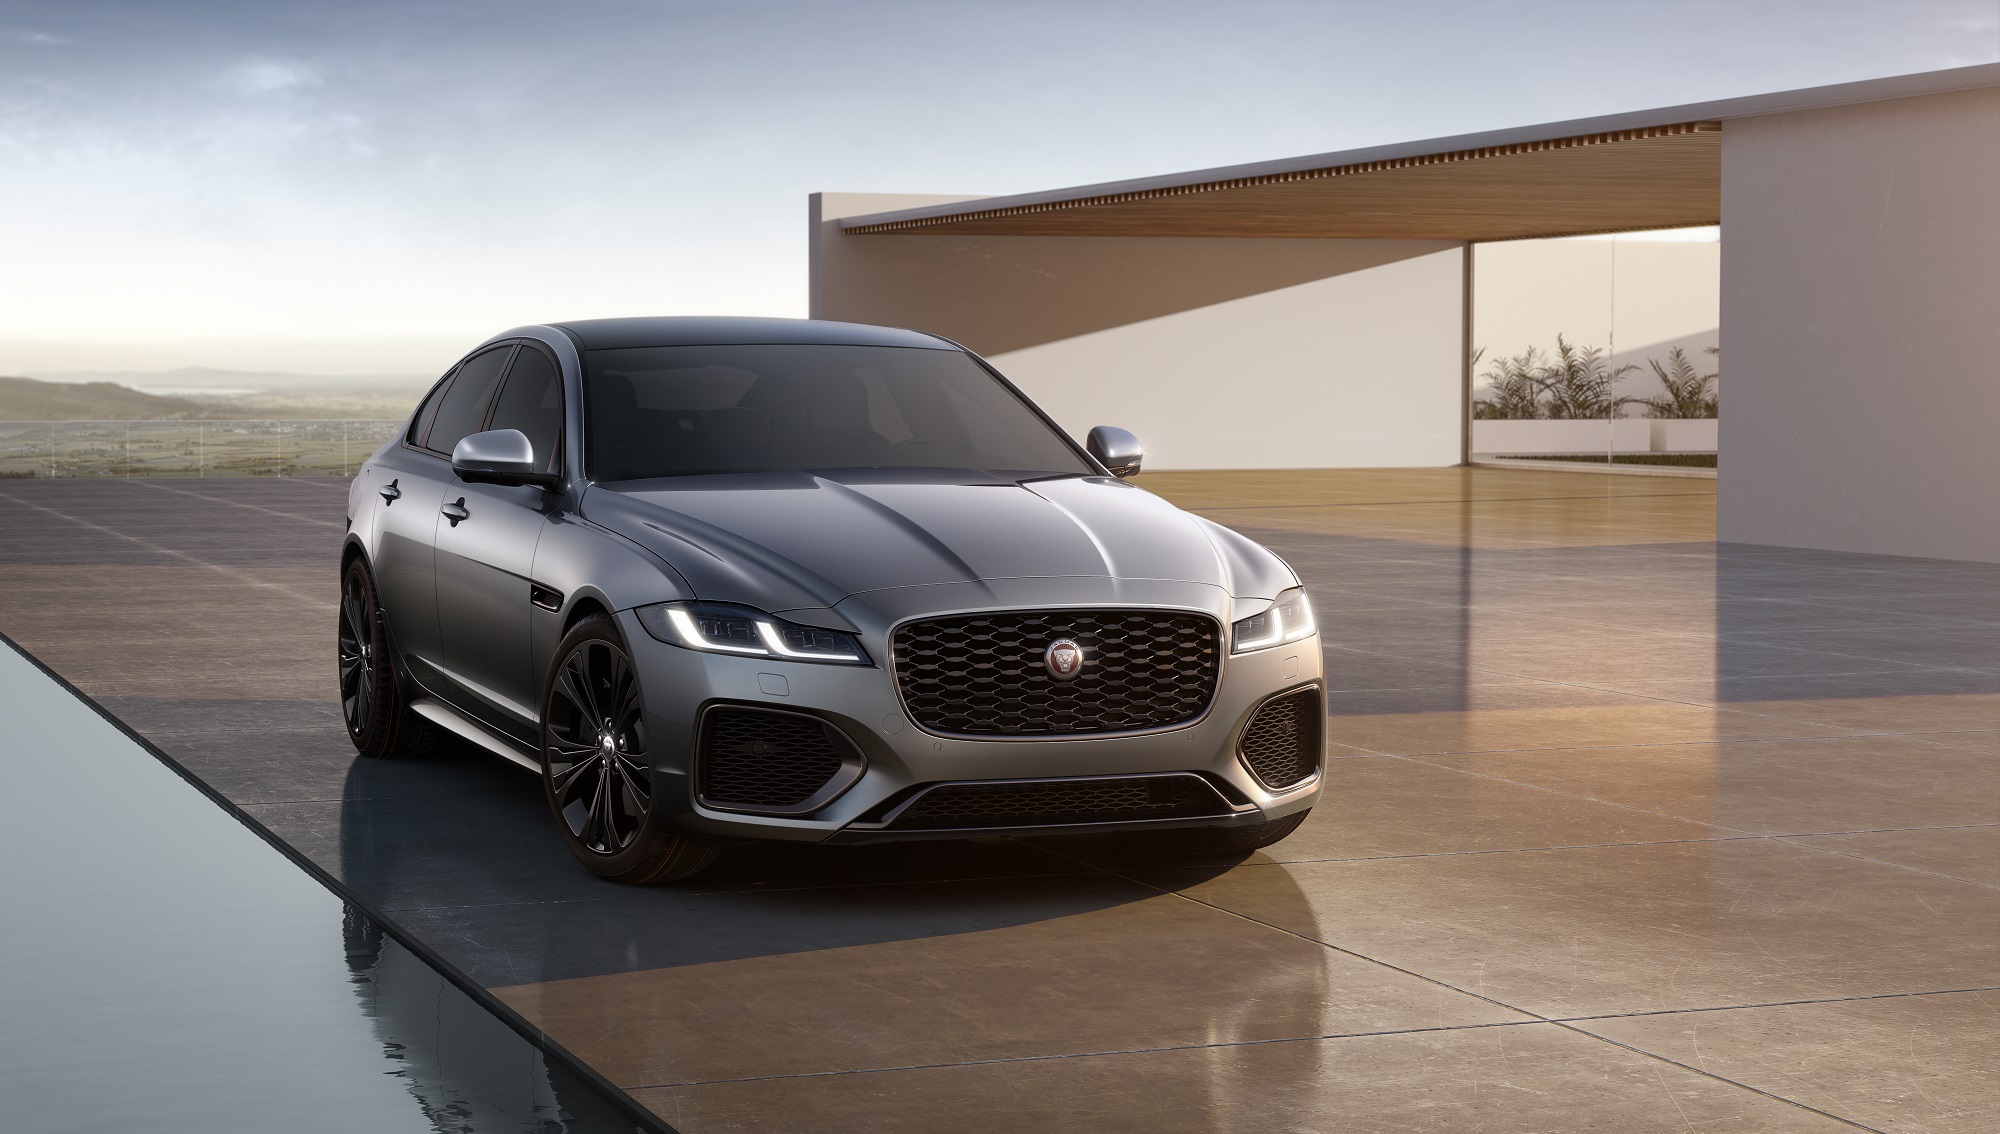 The Jaguar XF is luxurious and handsome, but not quick enough to outrun a Kia Stinger.